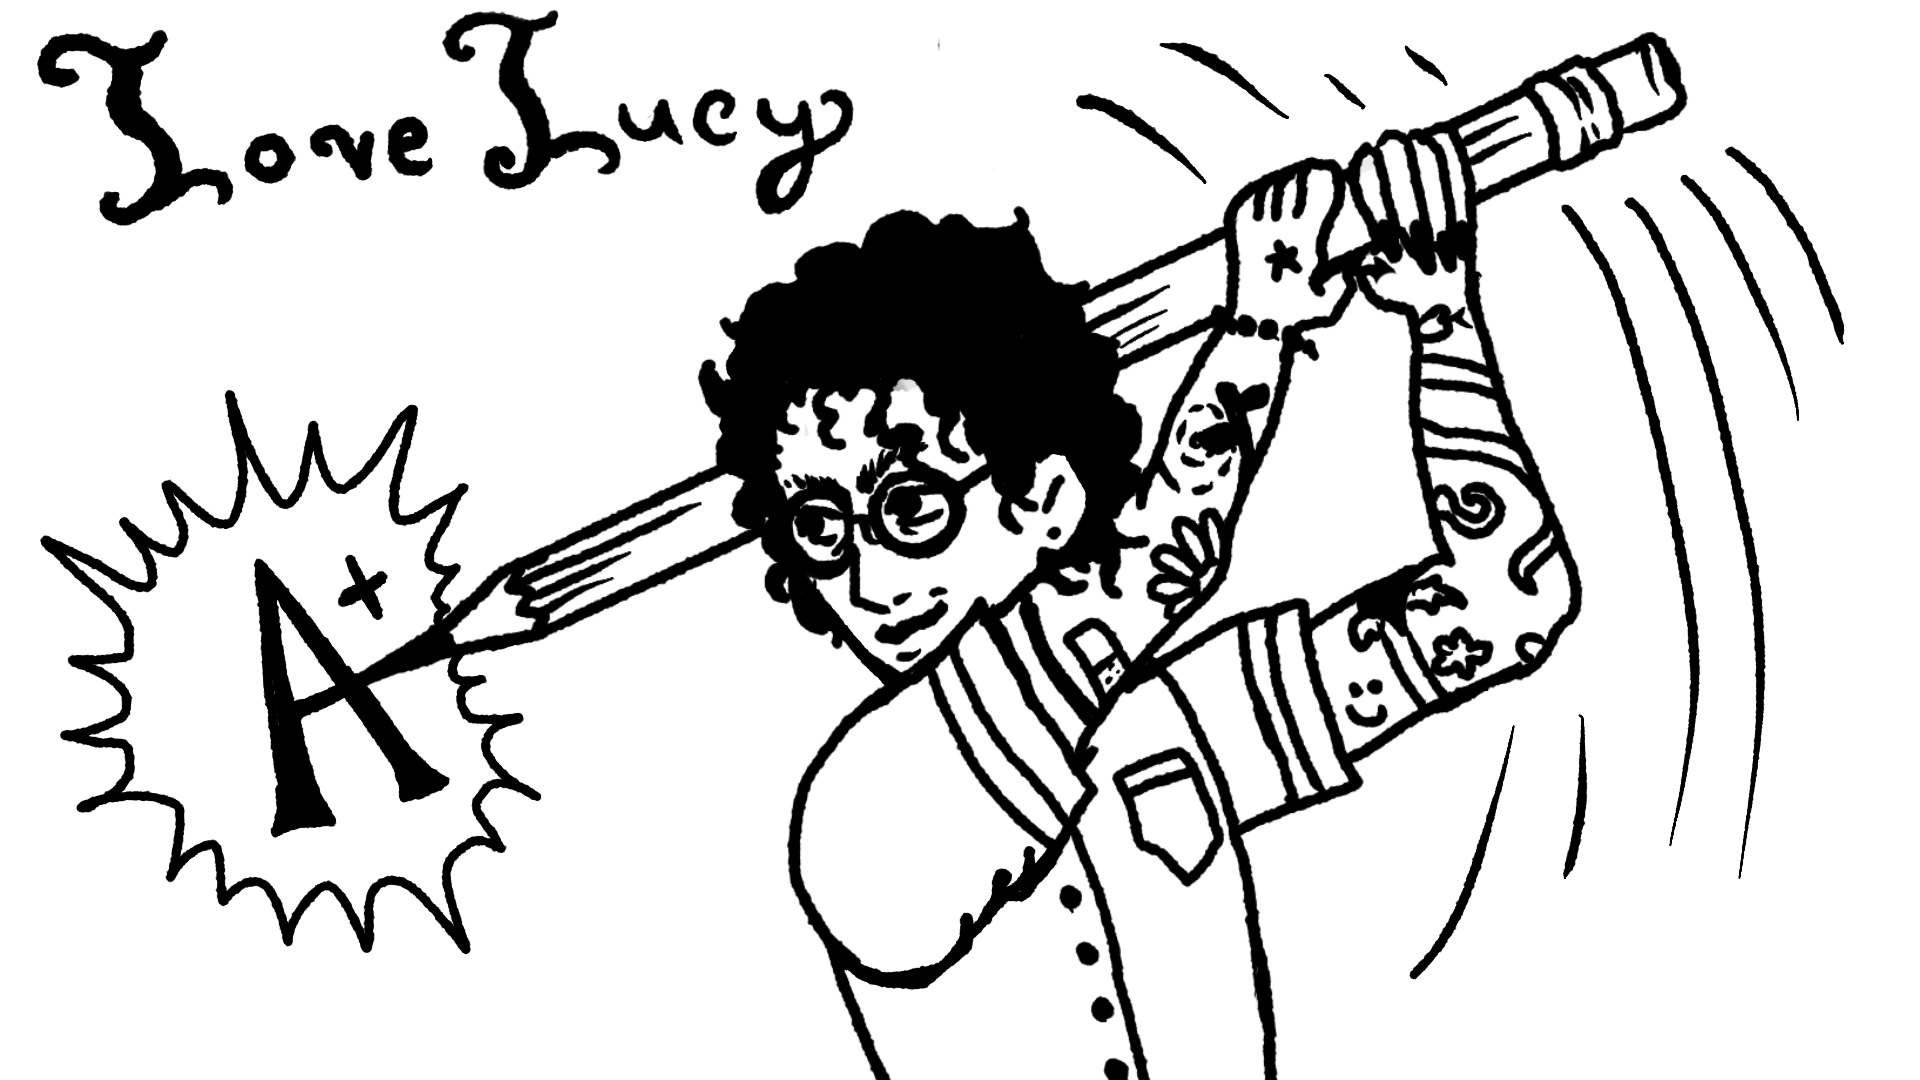 Black-and-white illustration of a person wielding a pencil like it’s a sword that’s writing “A+” in a speech bubble. The top left corner reads “Love Lucy.”